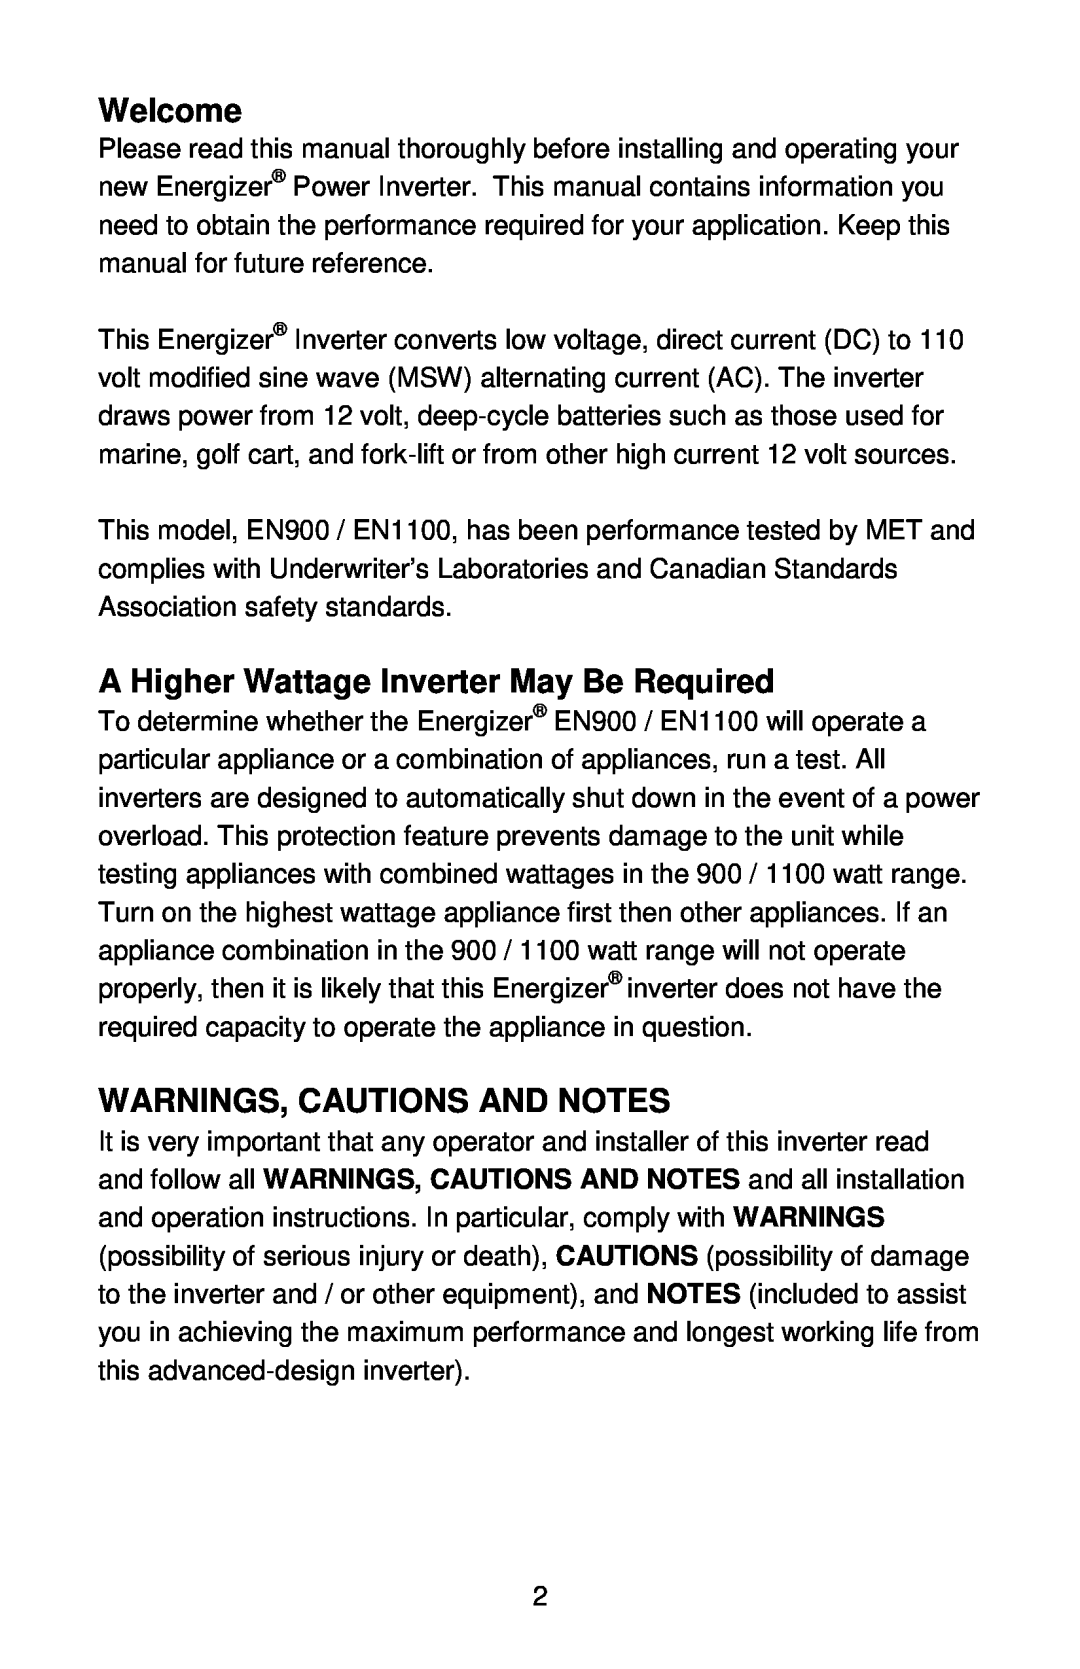 Energizer EN1100 manual Welcome, A Higher Wattage Inverter May Be Required, Warnings, Cautions And Notes 